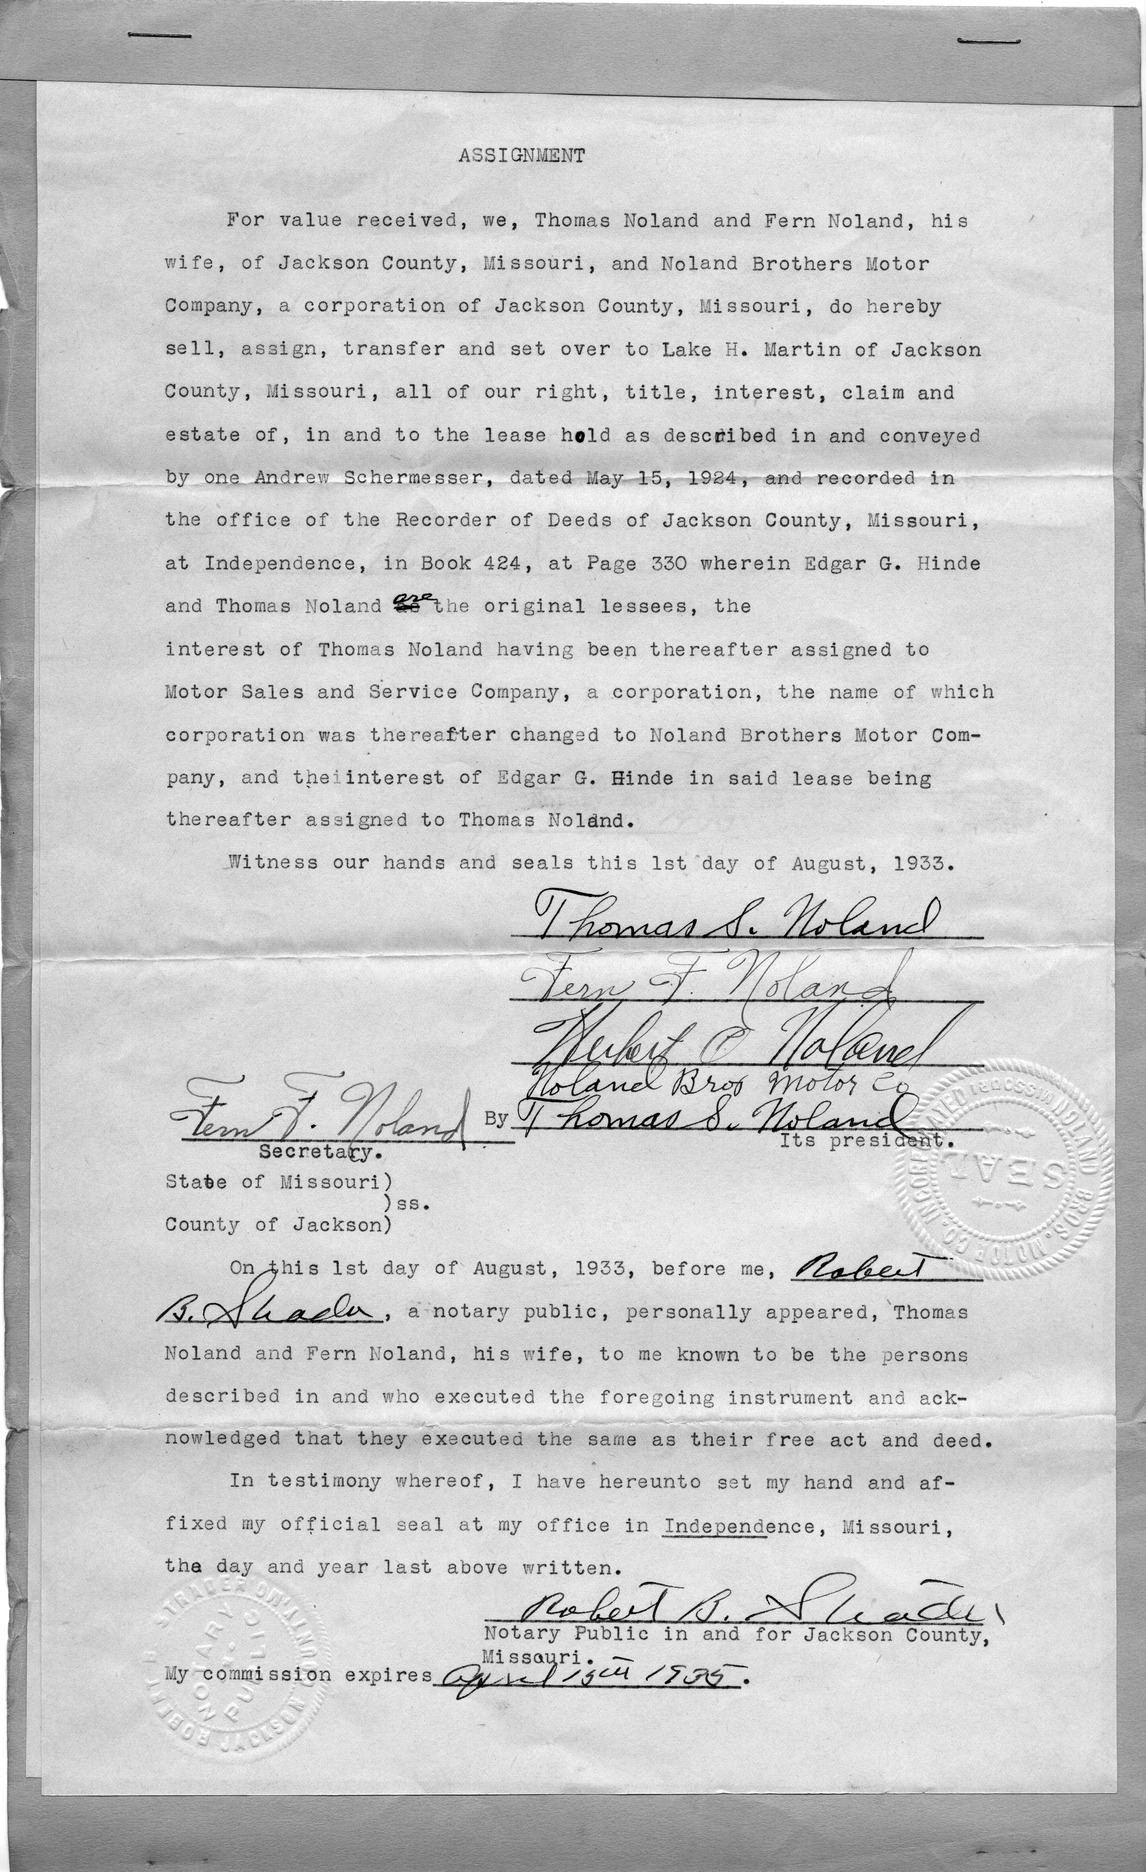 Assignment of Lease by Thomas Noland, Fern Noland, and Noland Brothers Motor Company to Lake H. Martin